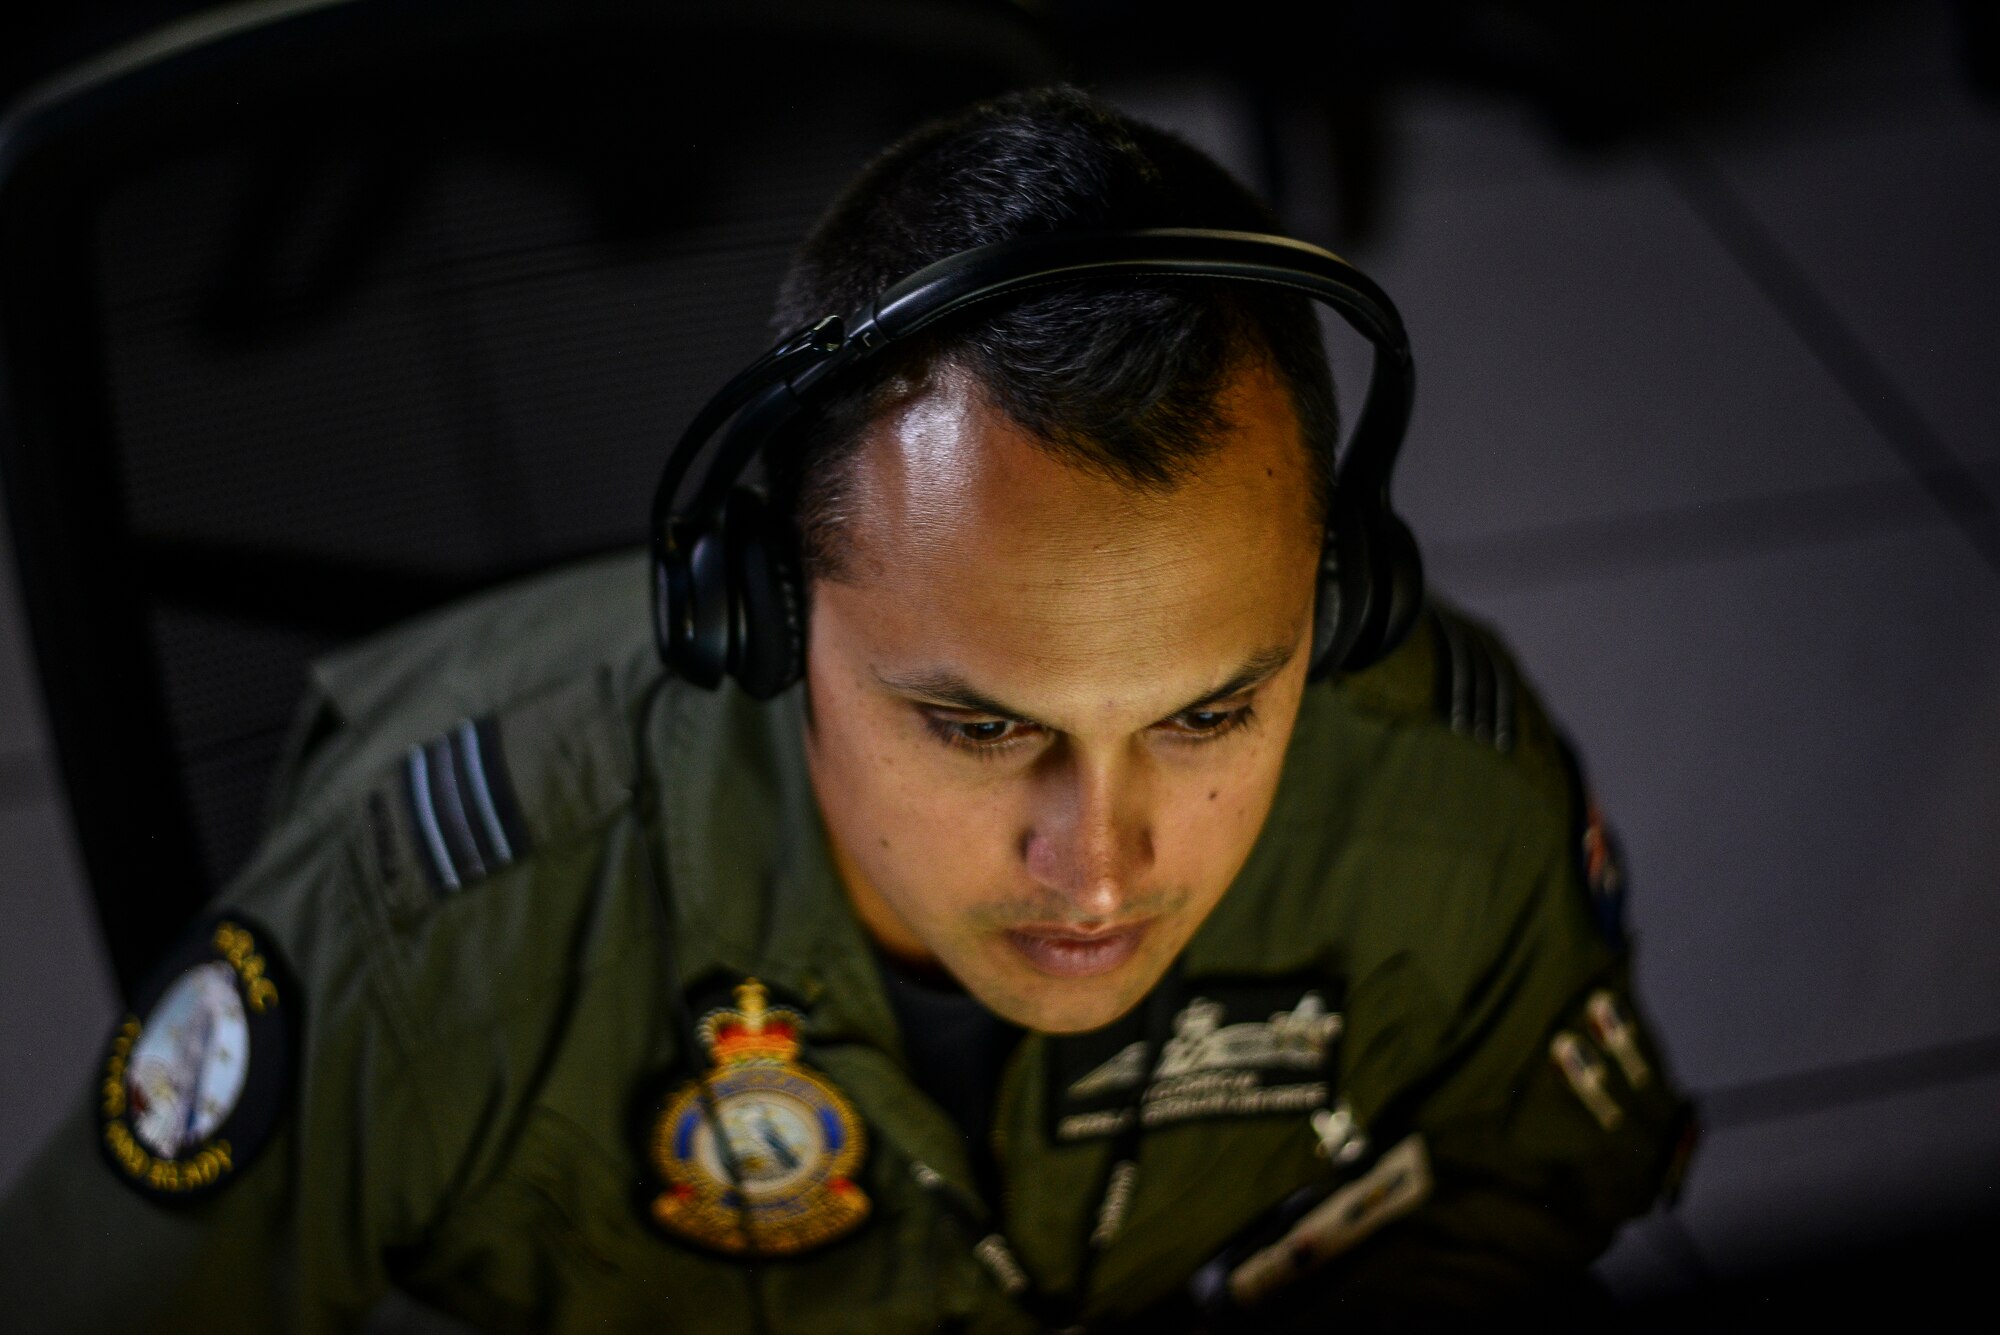 A member of the Royal Australian Air Force takes part in the Exercise Coalition VIRTUAL FLAG 19-4 at Kirtland Air Force Base, N.M., Sept. 10, 2019. Exercise CVF 19-4, is the largest virtual flag to date. (U.S. Air Force photo by Staff Sgt. Kimberly Nagle)